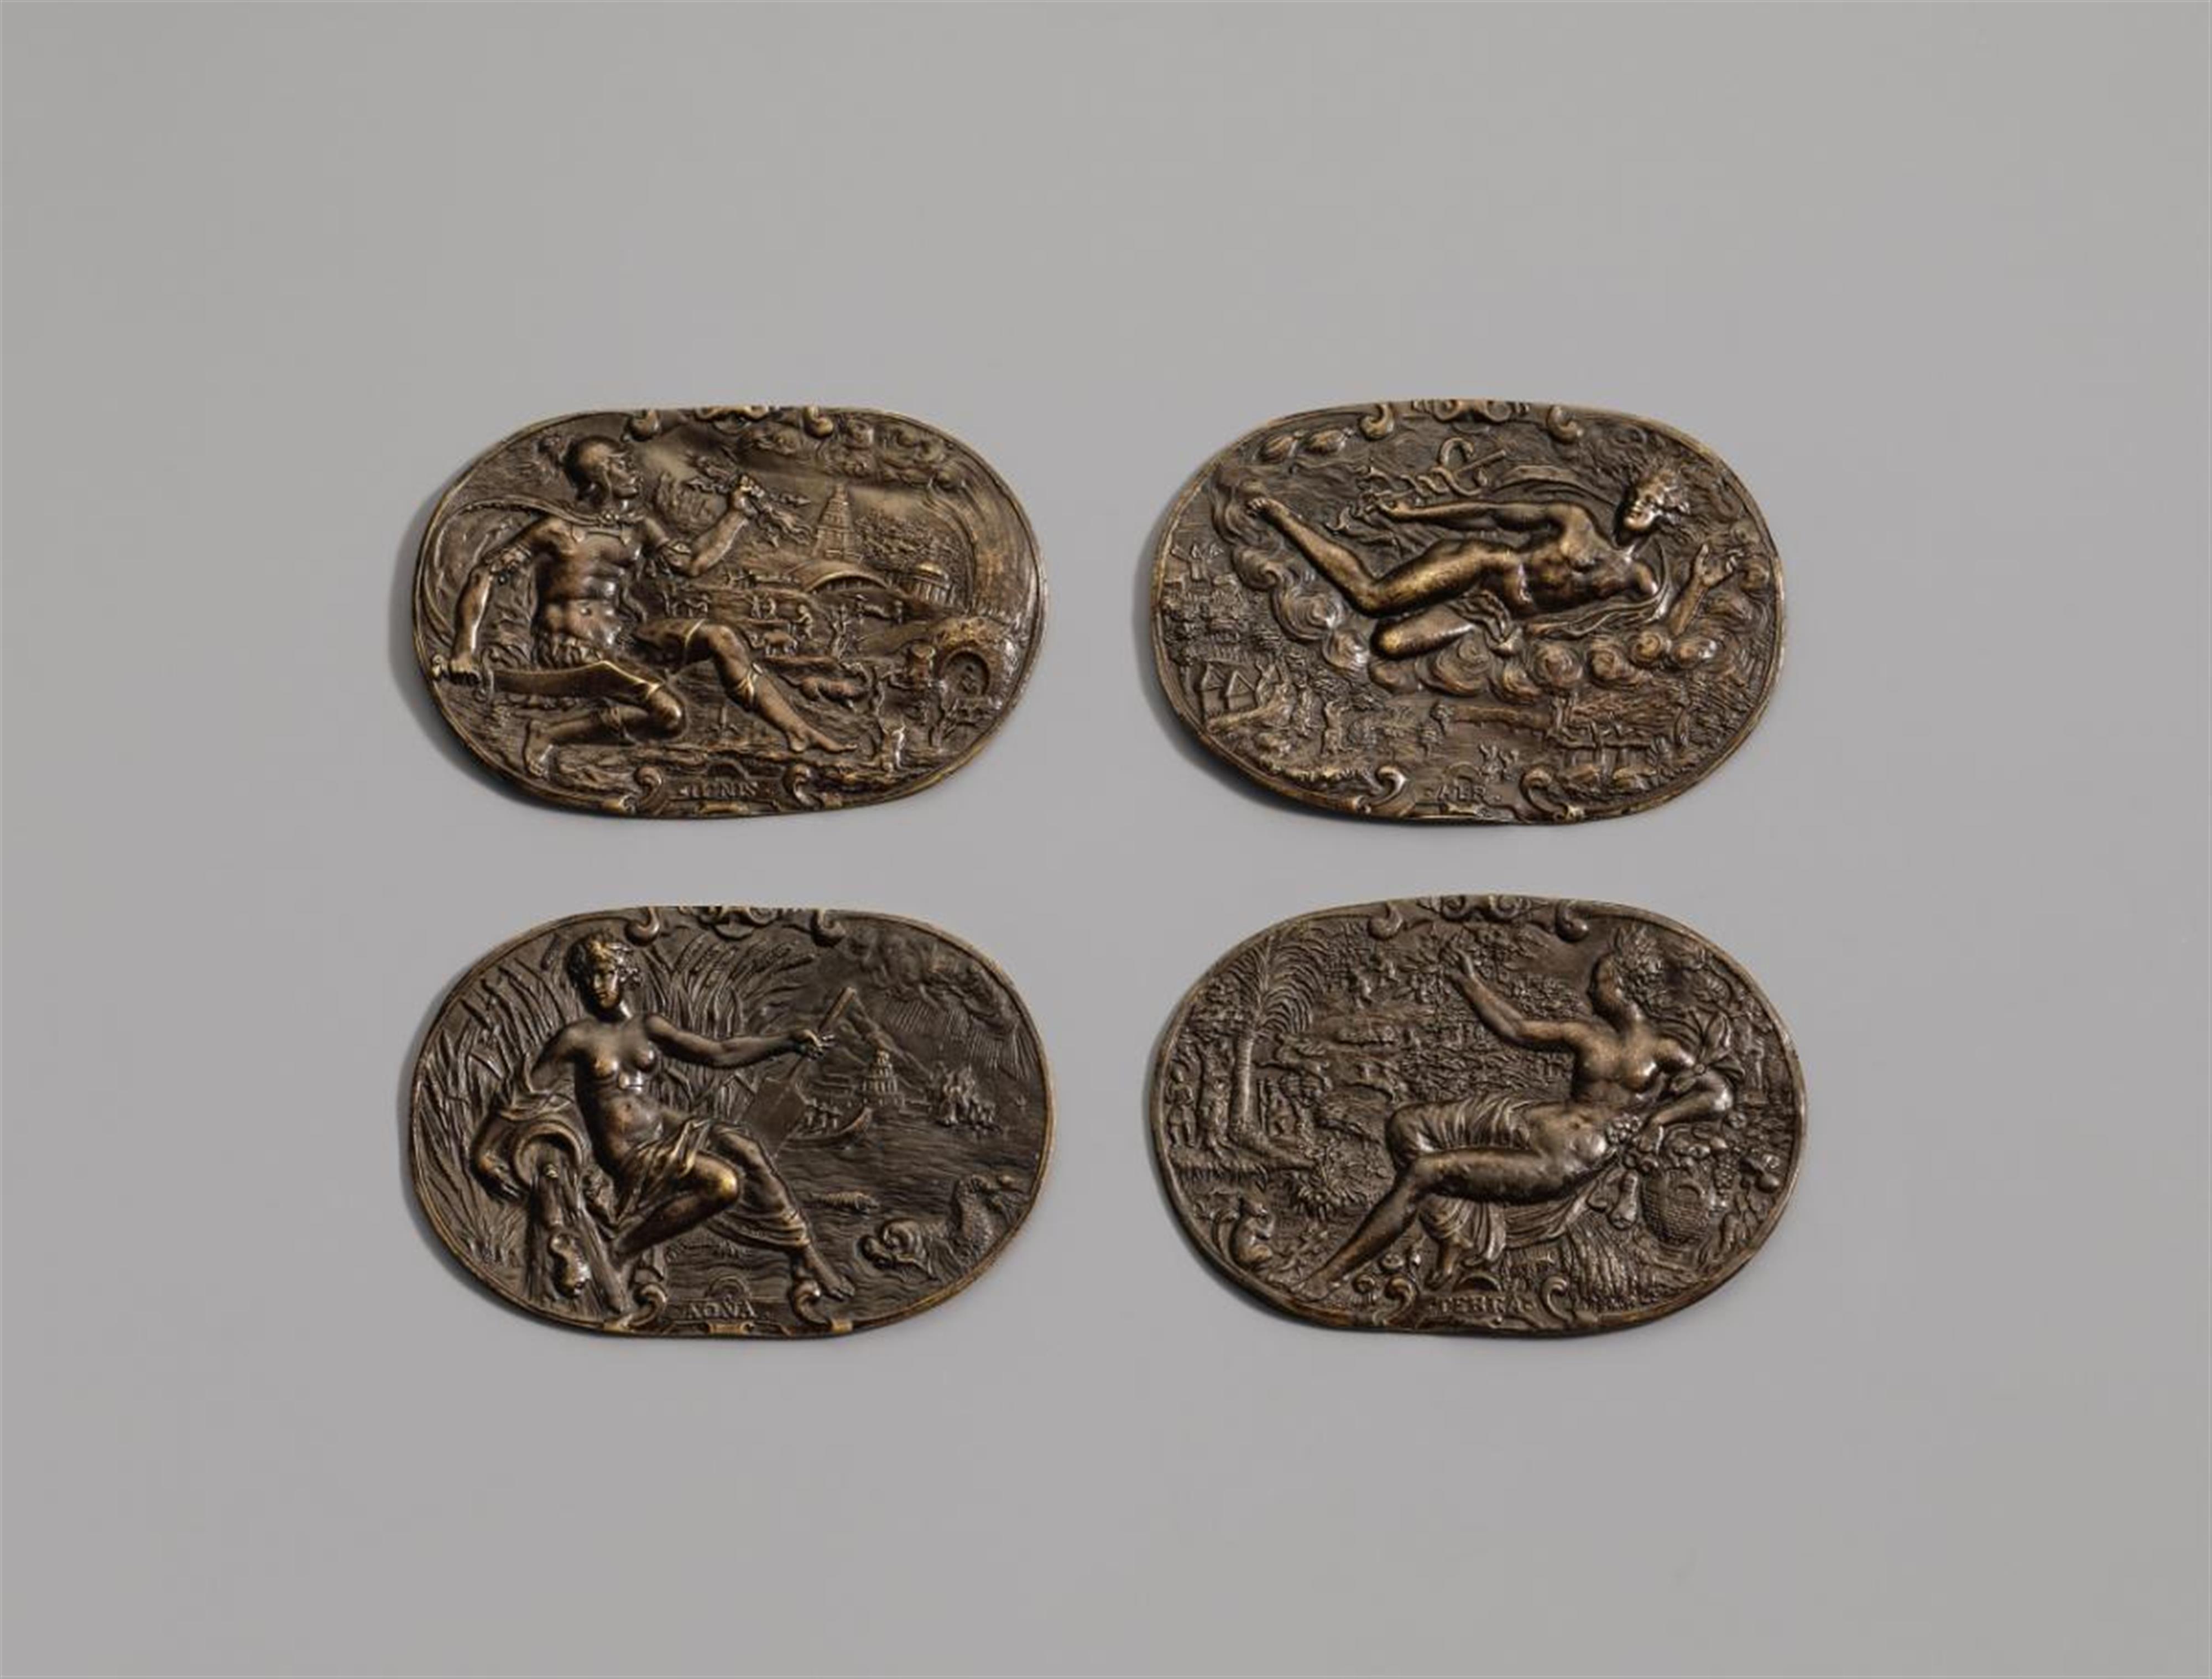 Caspar Enderlein, attributed to - Four plaques representing the elements, attributed to Caspar Enderlein - image-1